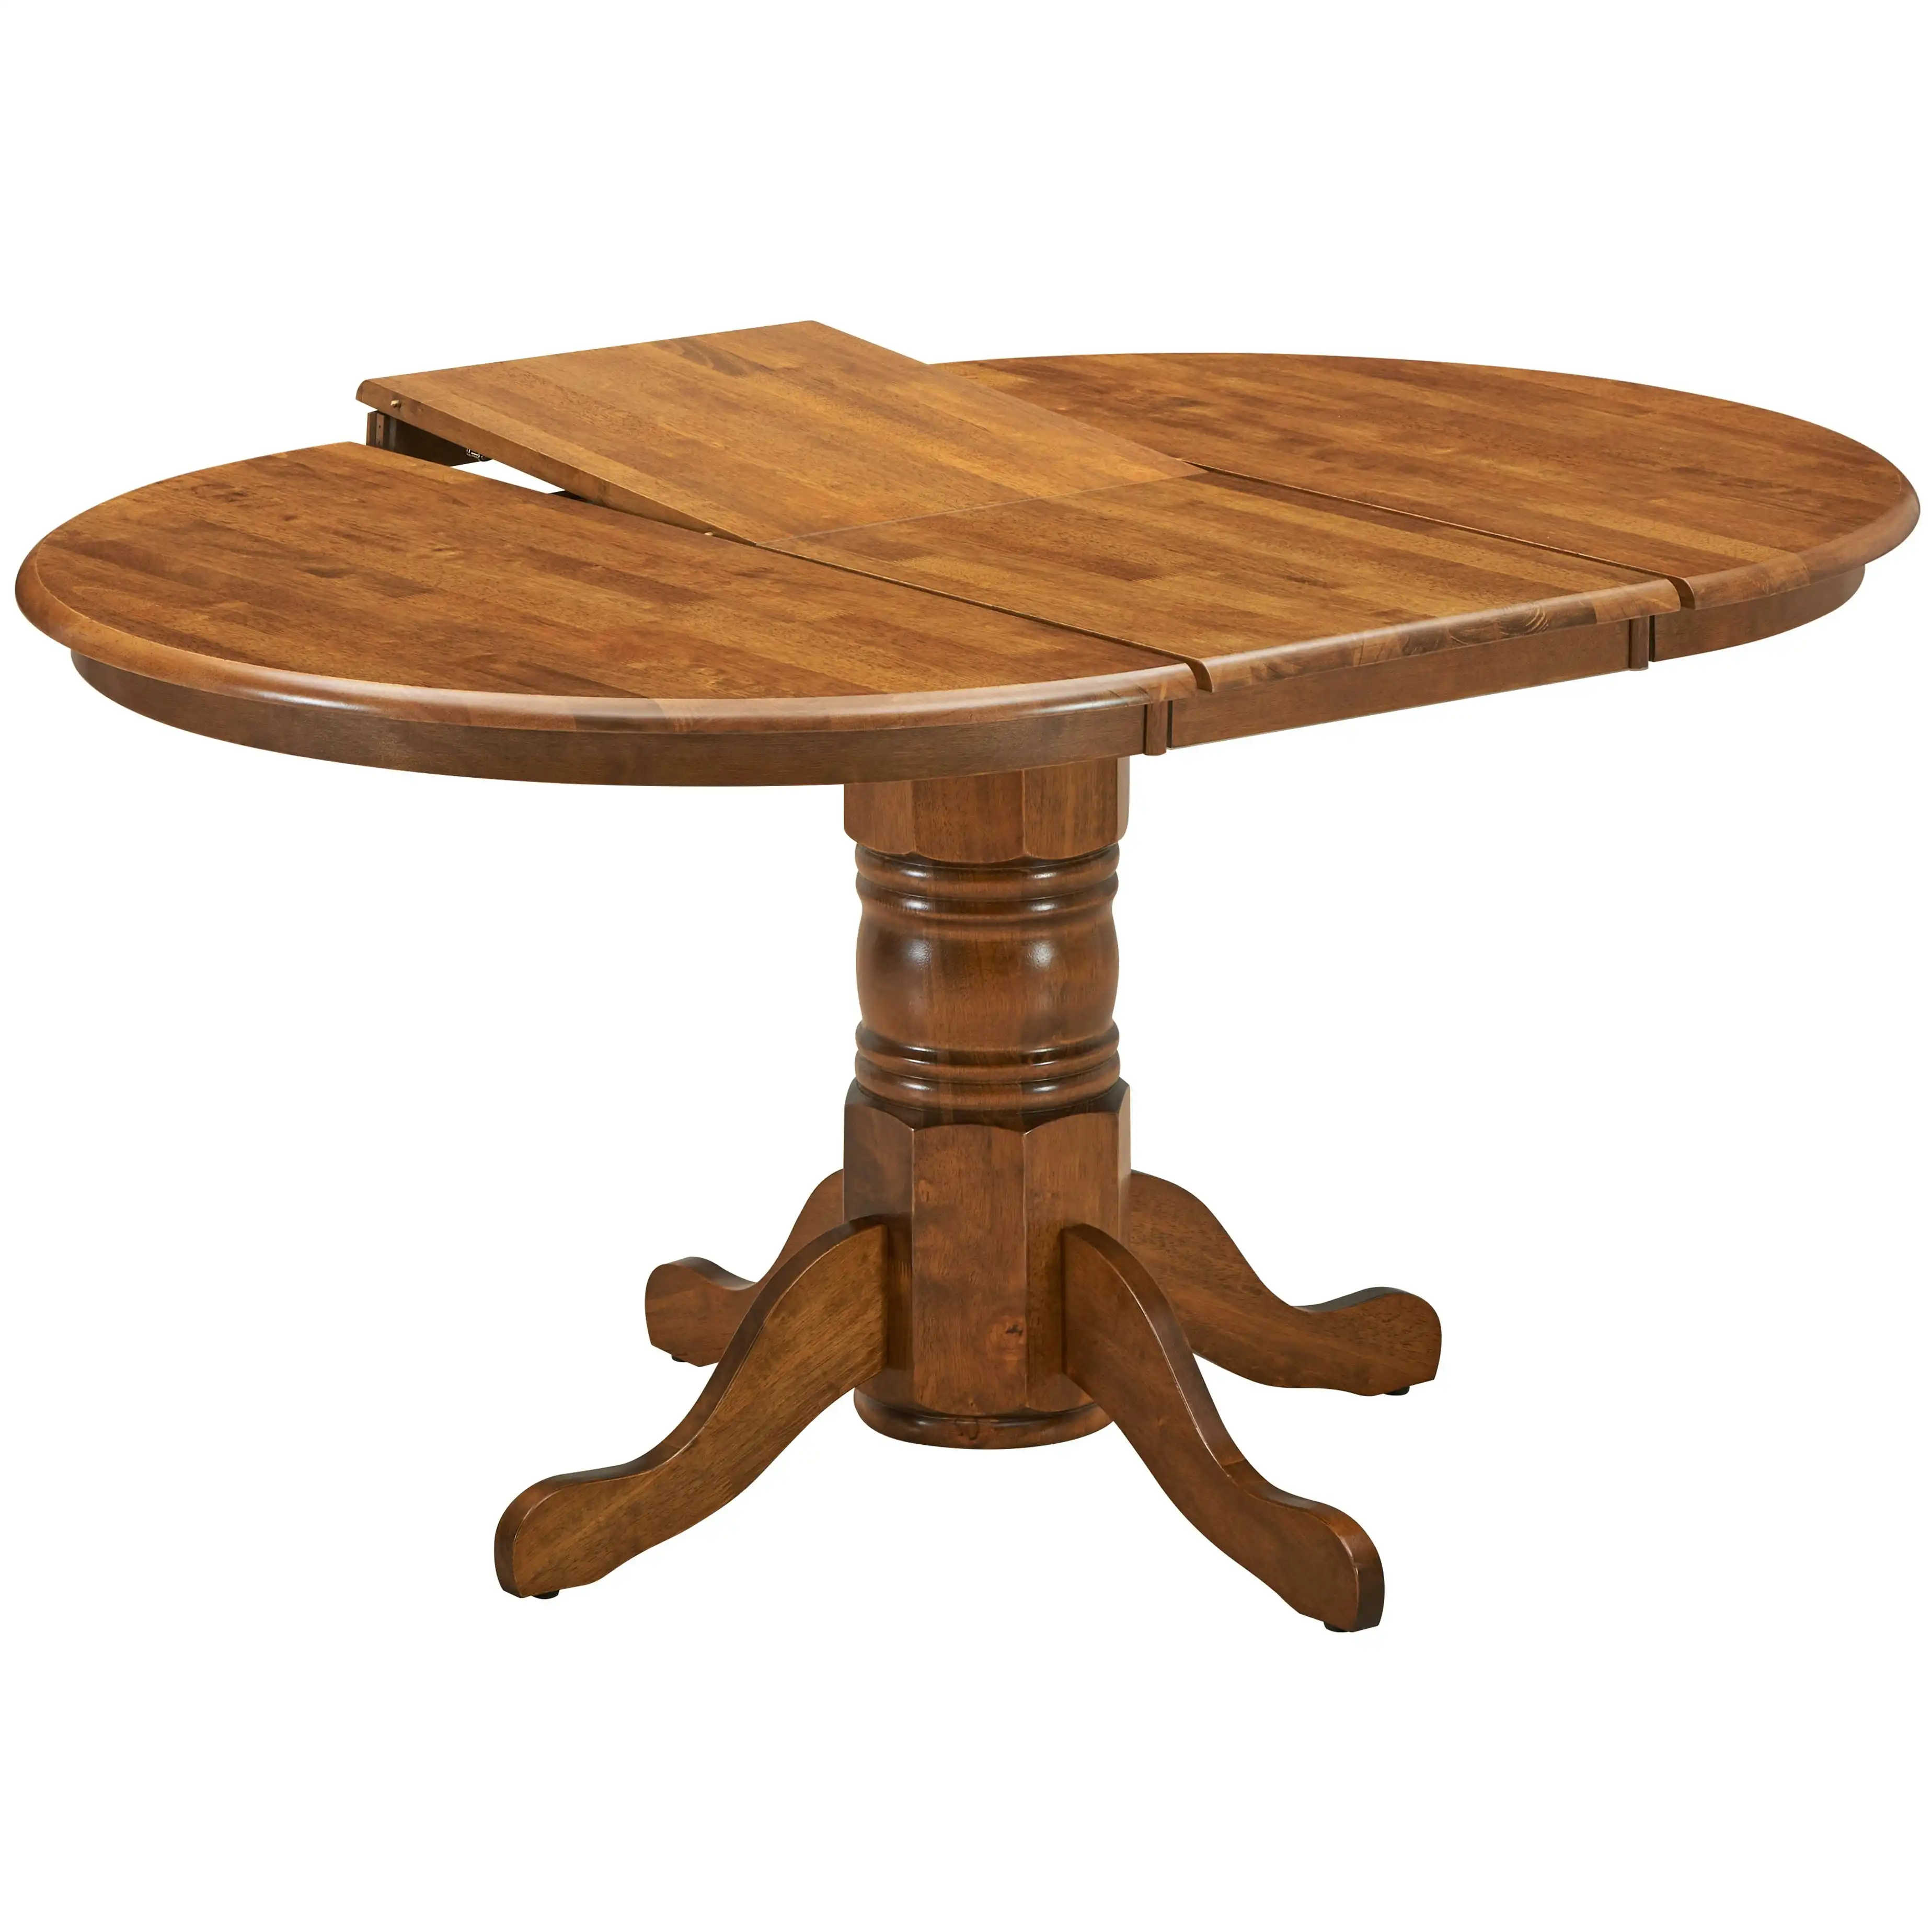 Linaria 106-150cm Extendable Round Dining Table